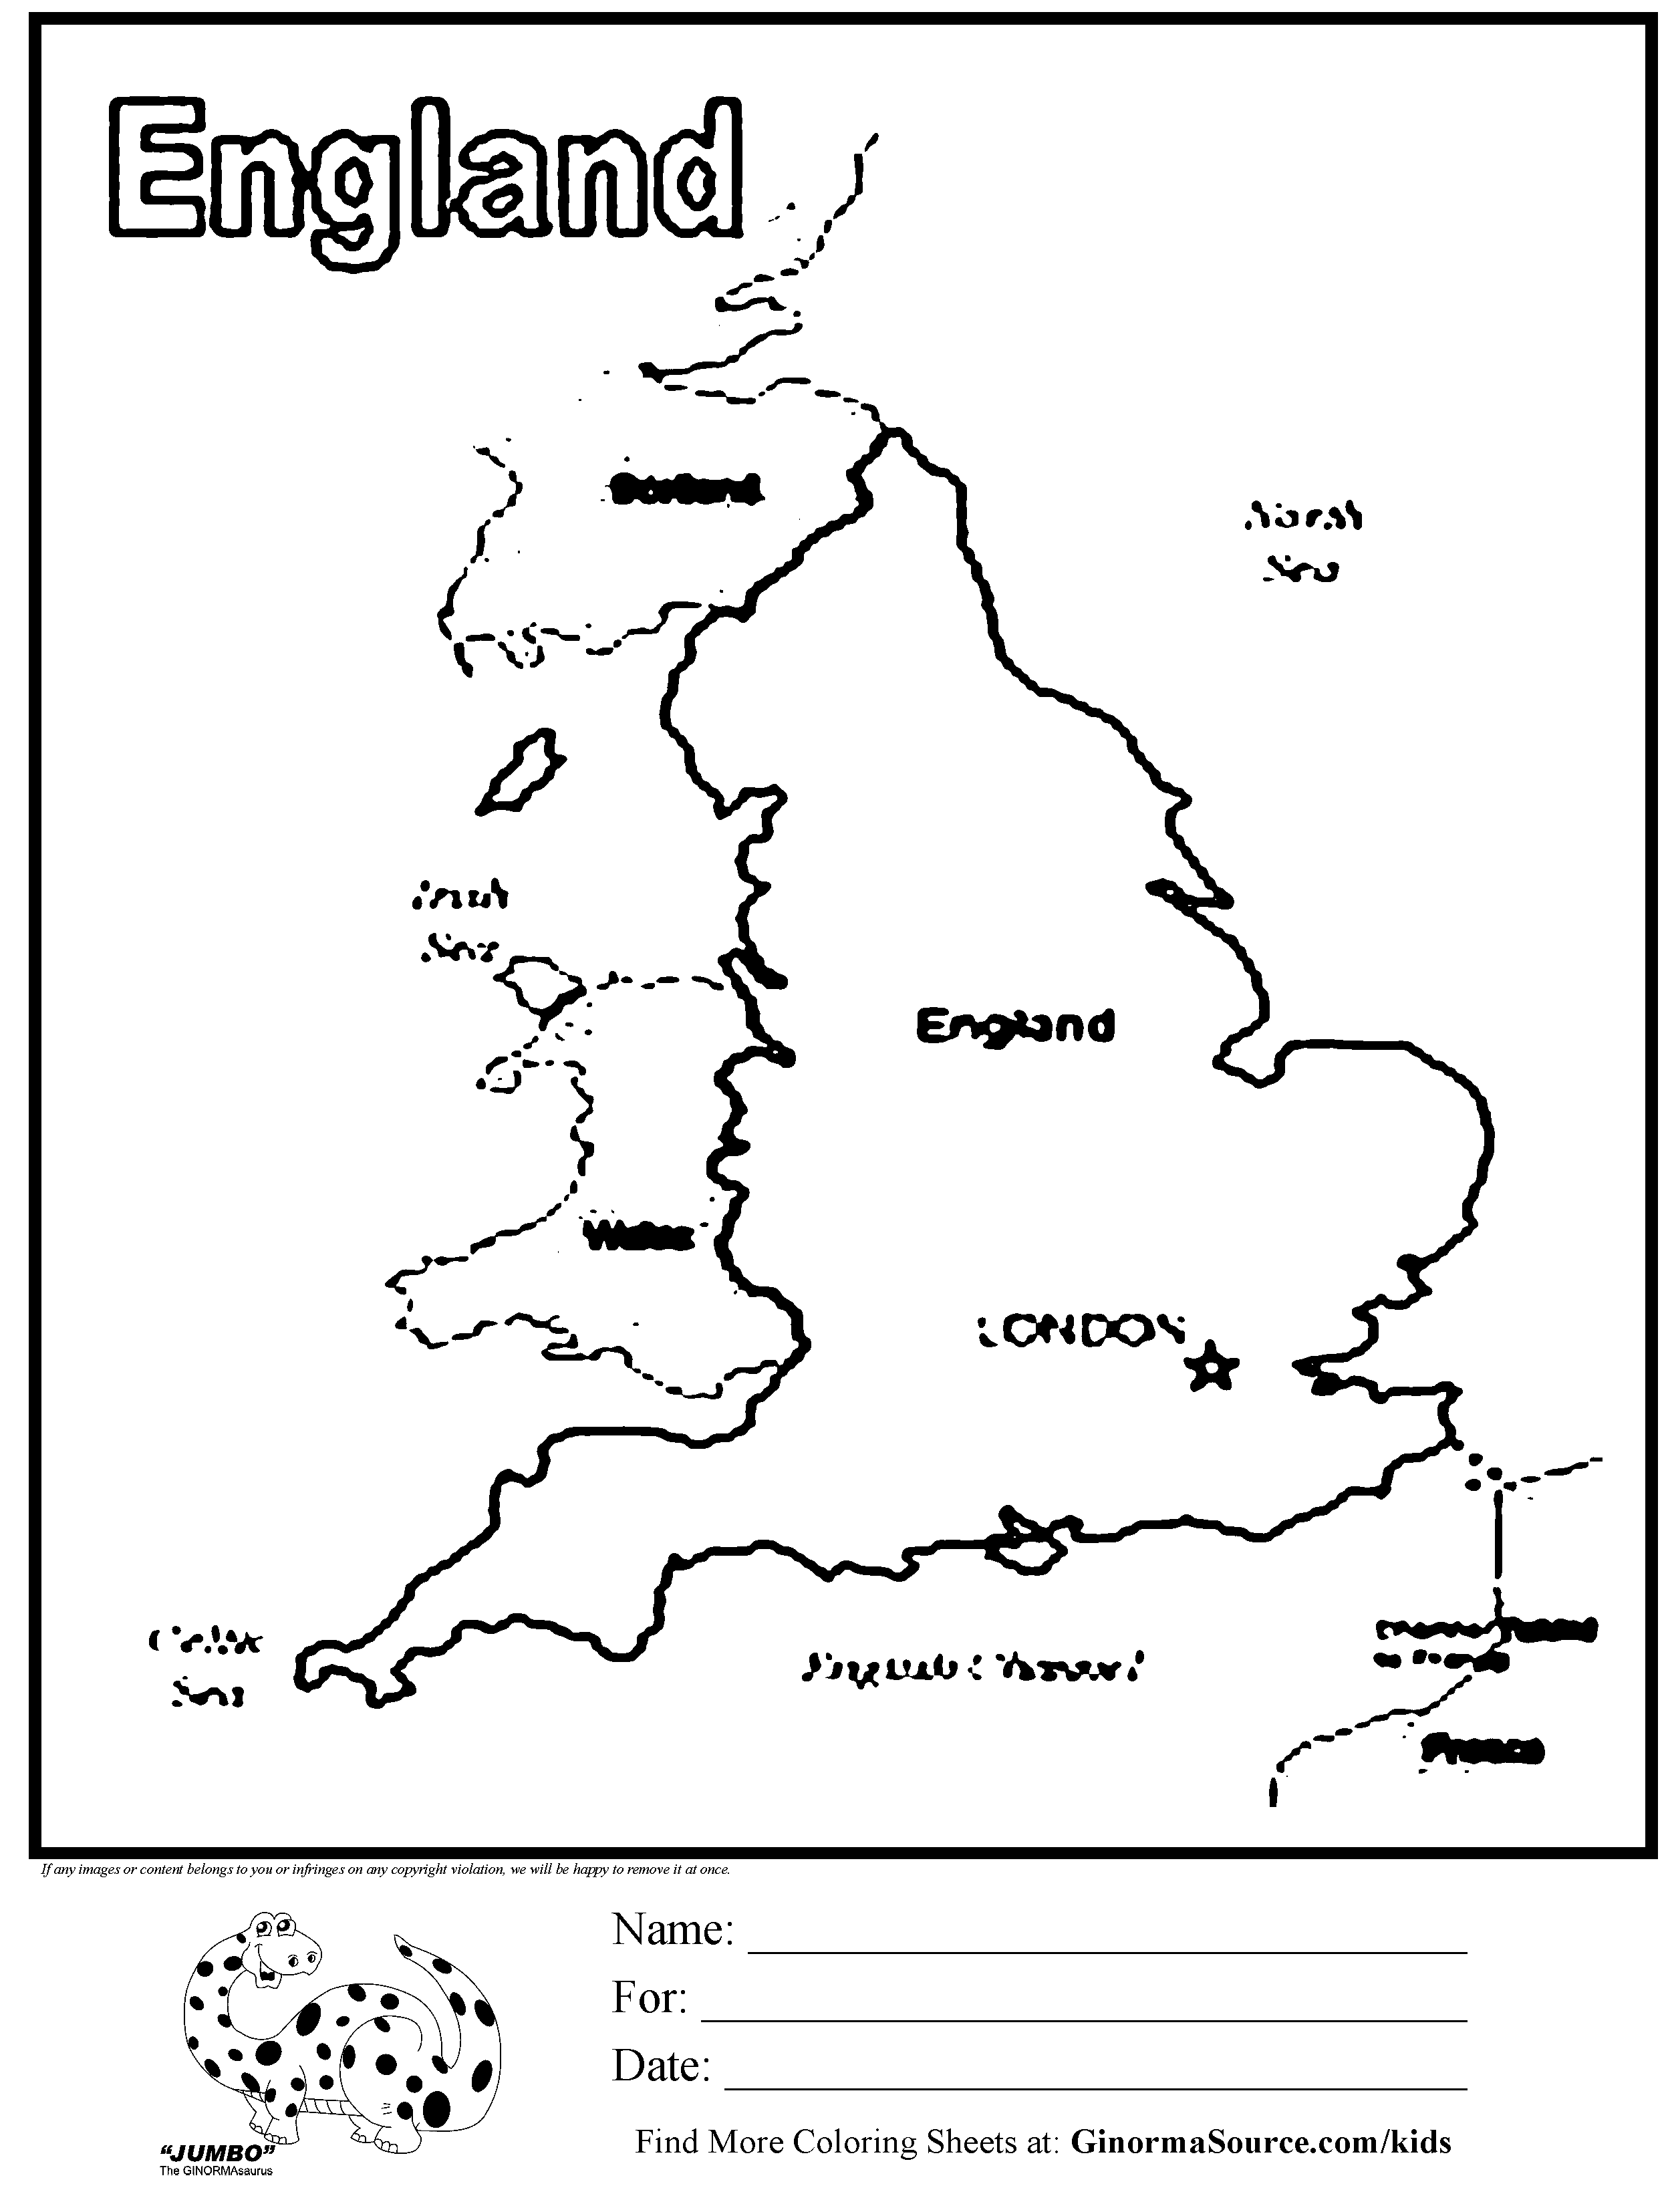 England coloring #10, Download drawings